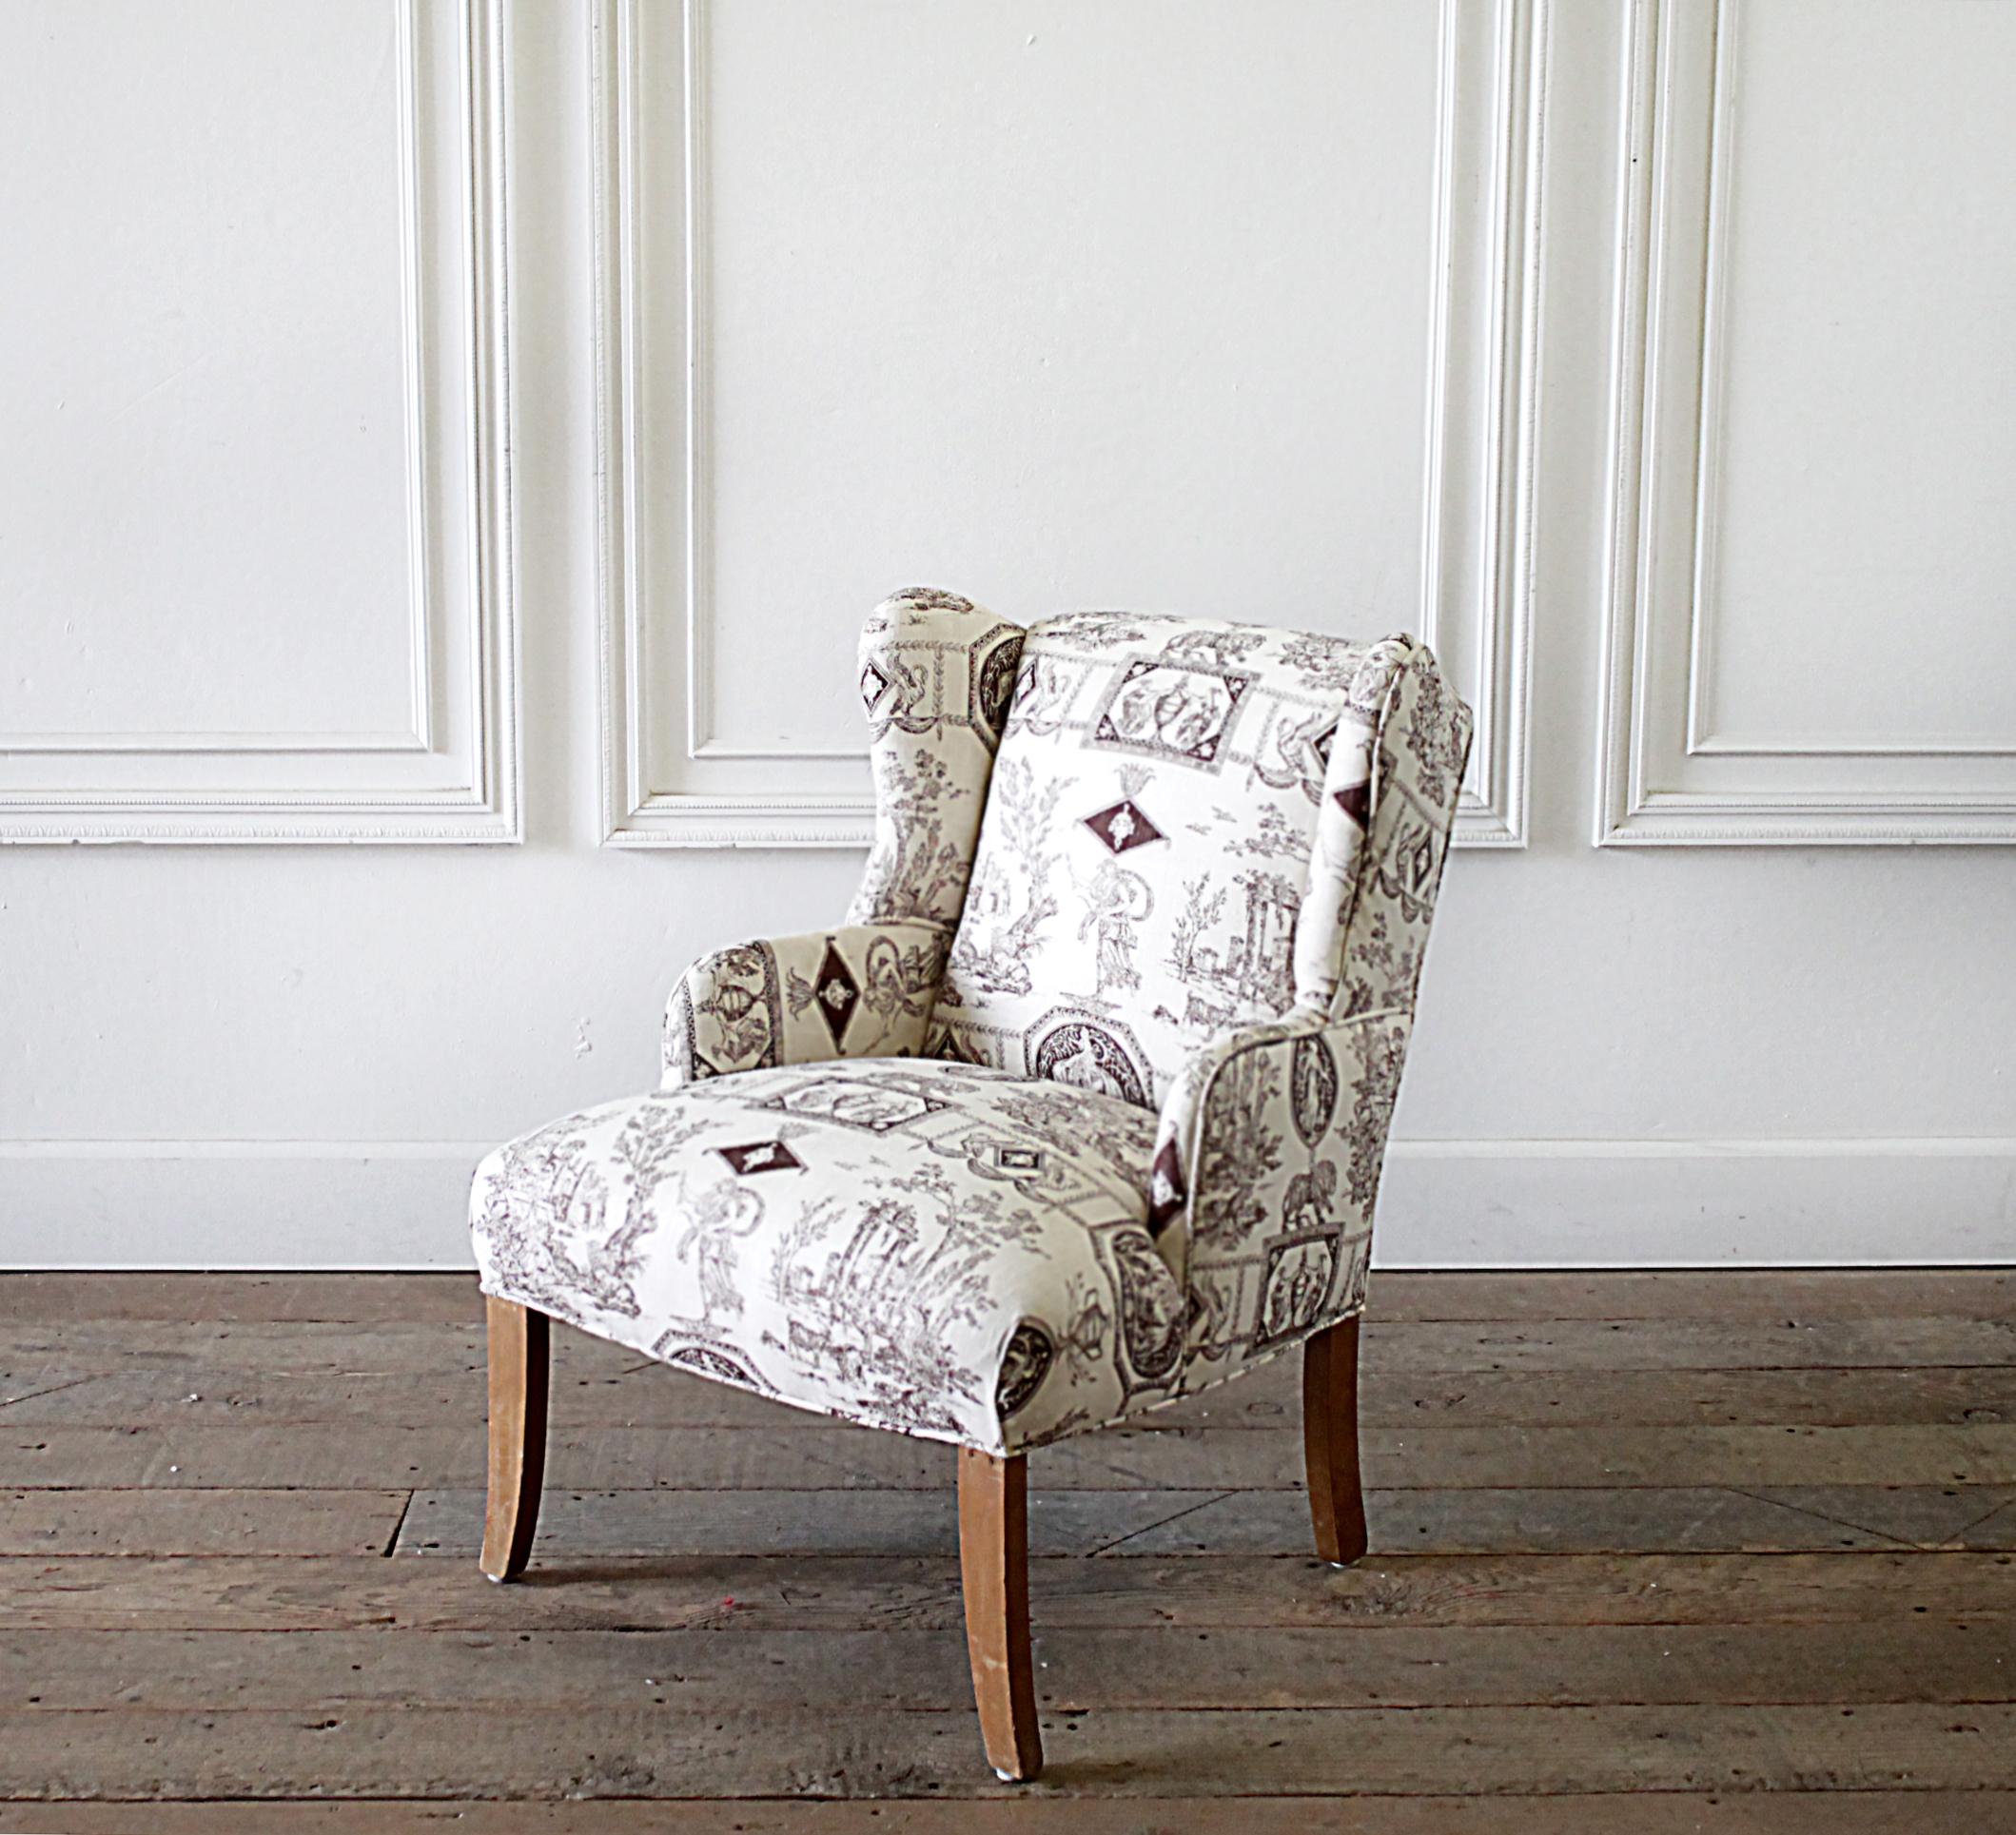 Petite wing chair upholstered in brown Toile fabric.
Could be used for a child’s chair, this is petite. Please review sizes. They have natural wood finished legs.
Dimensions:
21